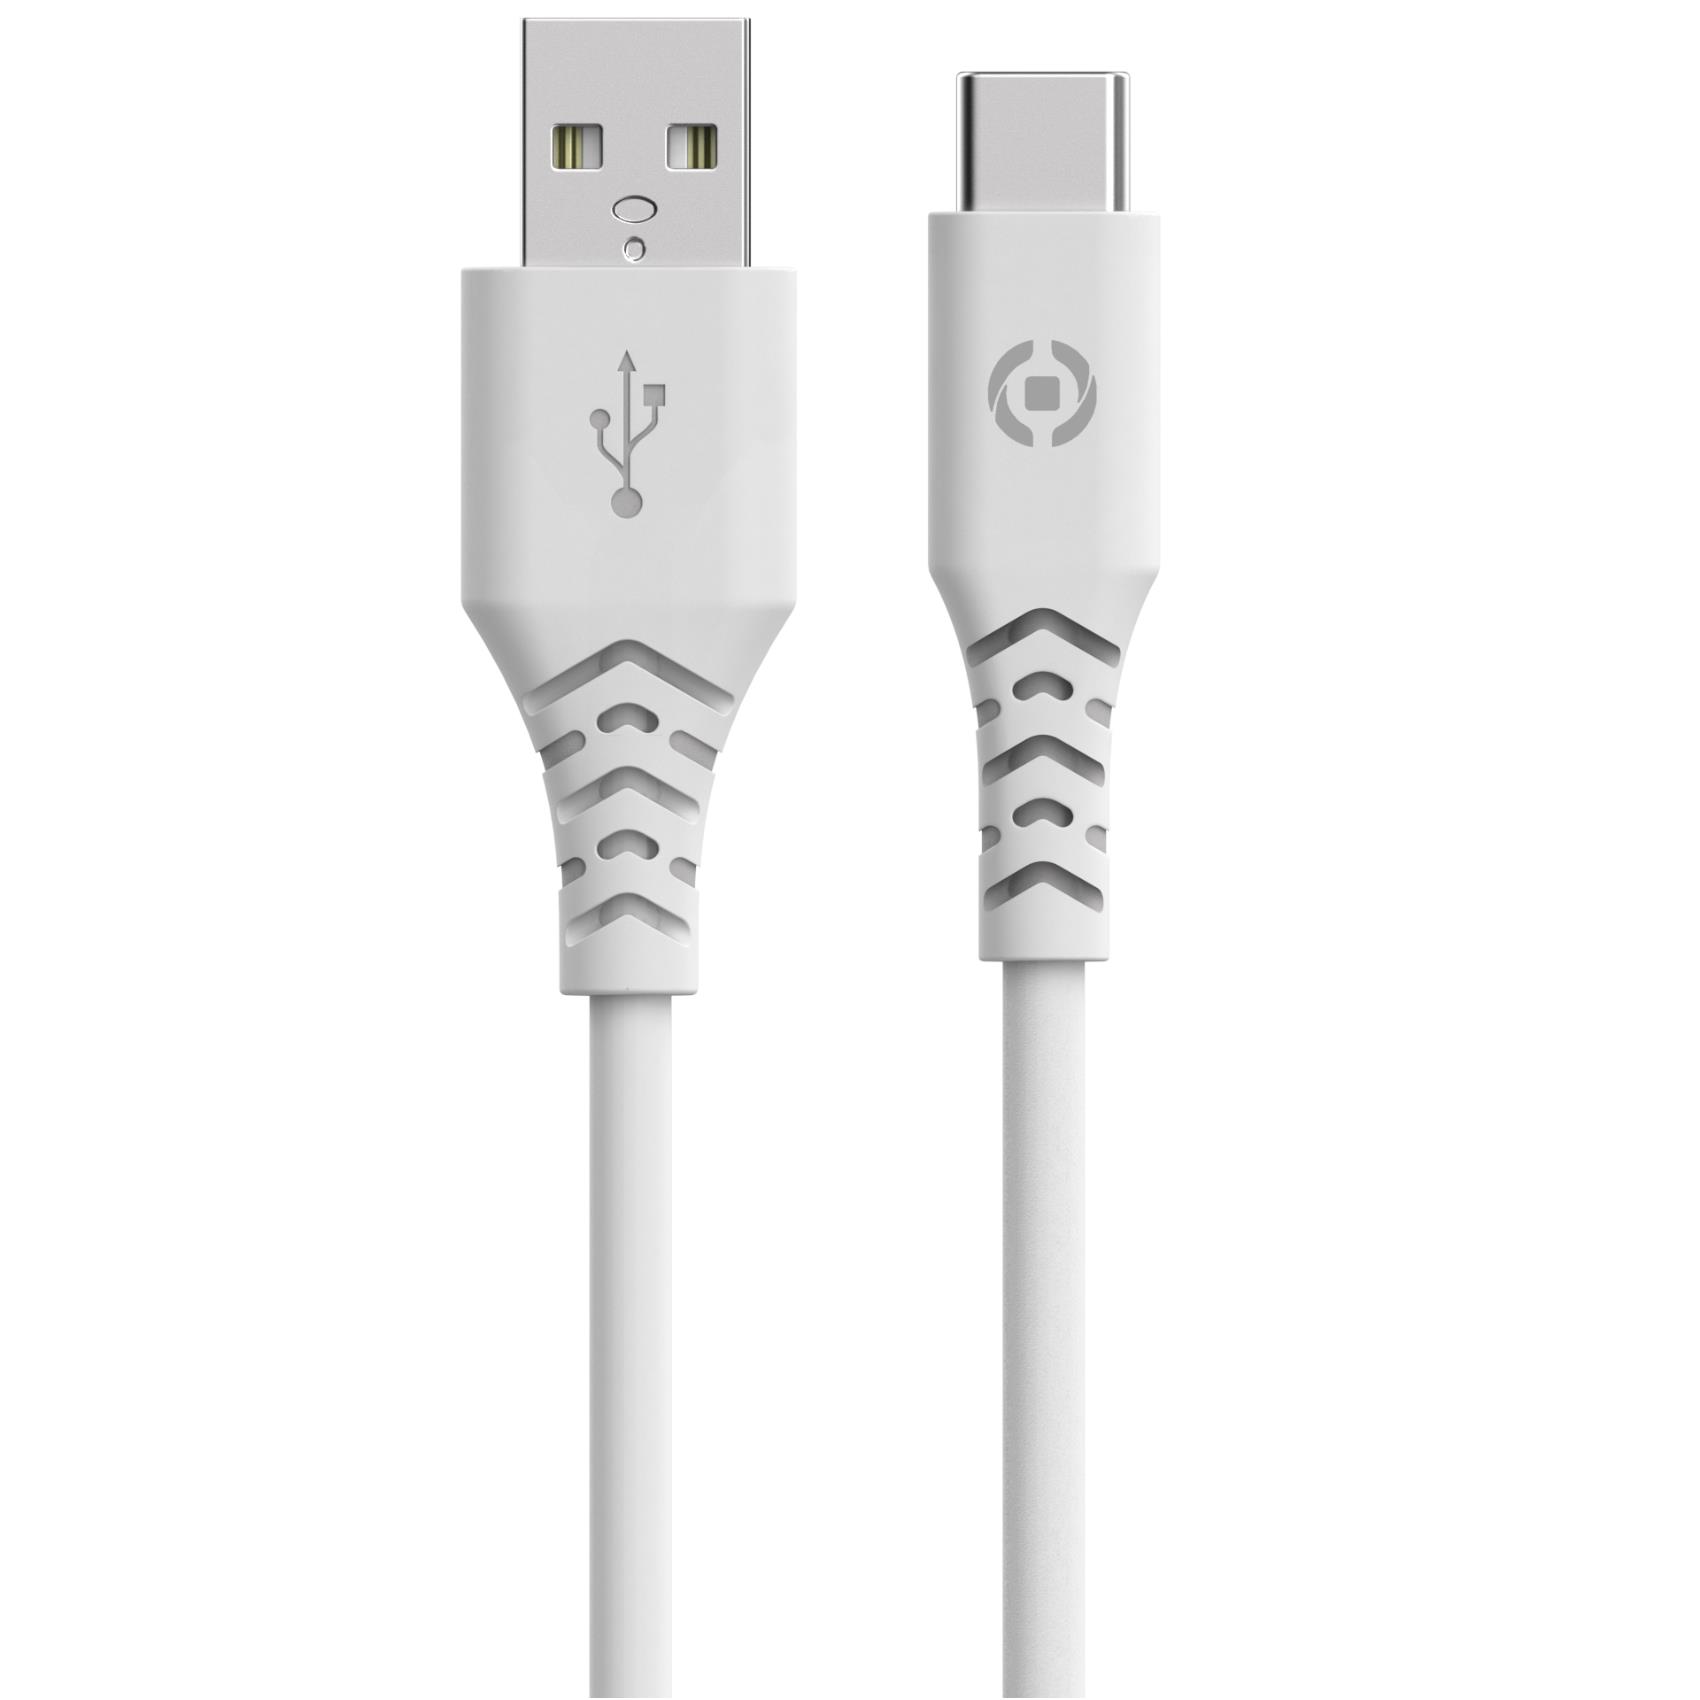 GRSUSBUSBC - USB-A to USB-C Cable - 100% Recycled Plastic [PLANET COLLECTION]